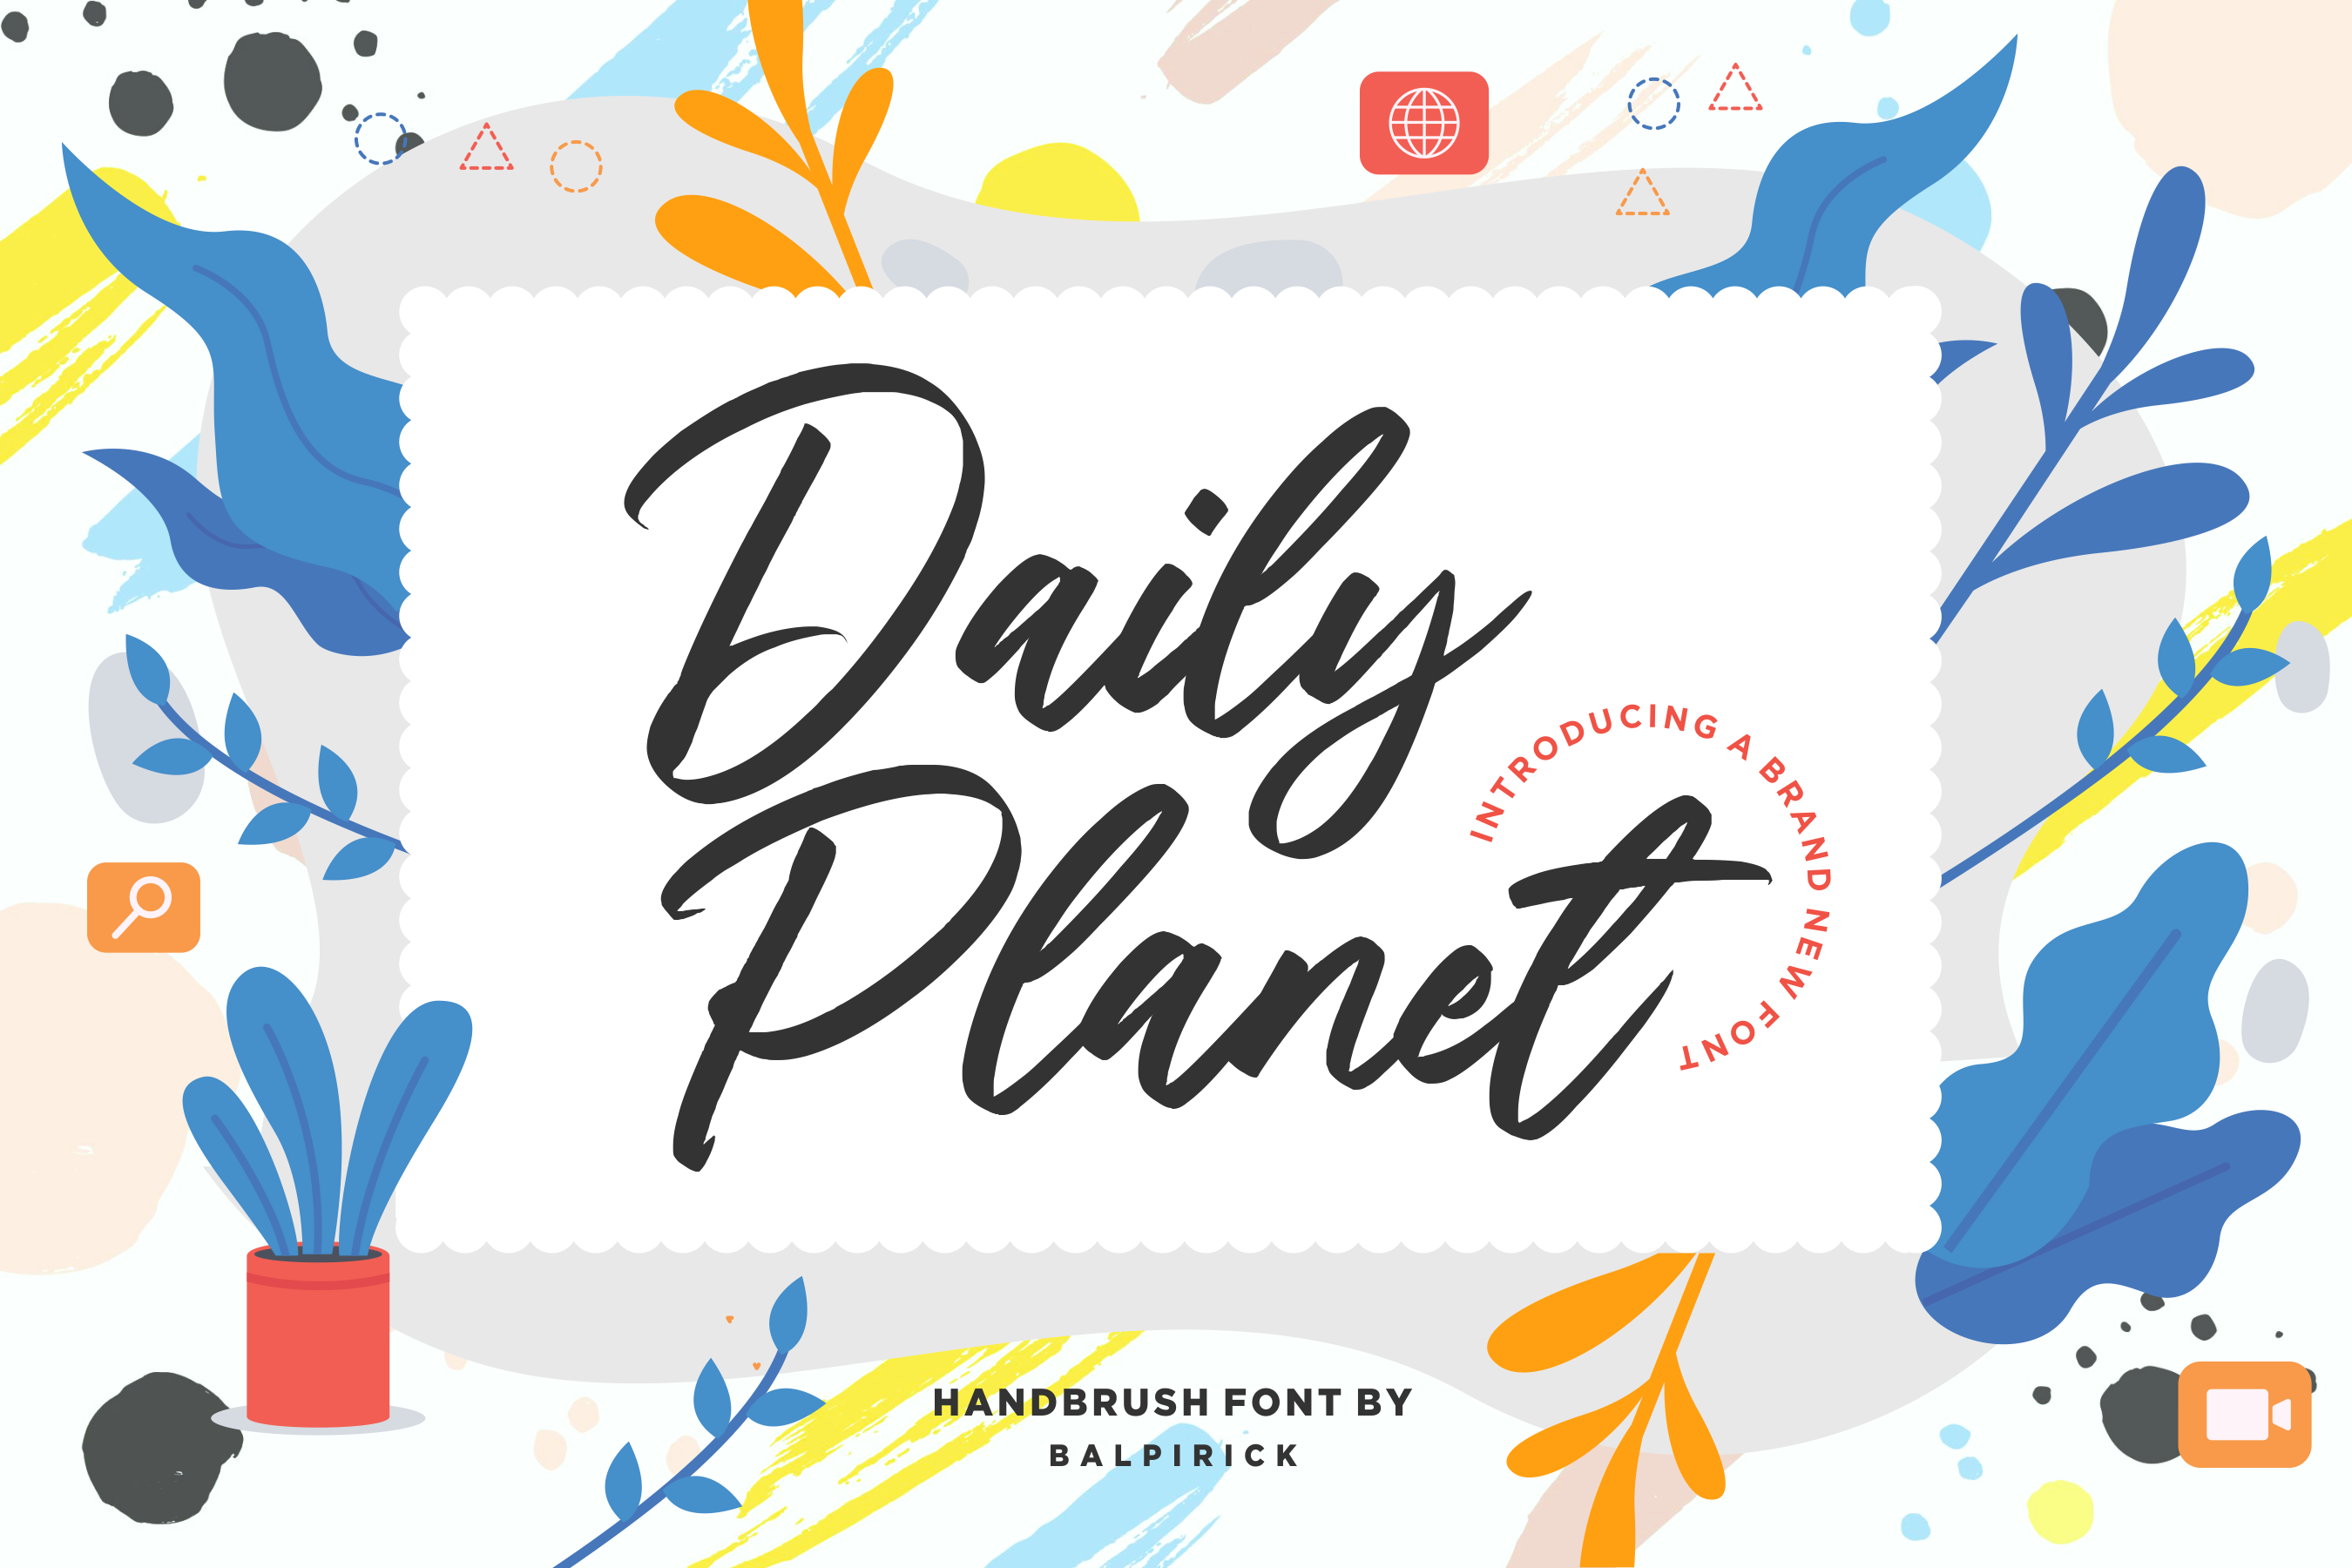 Daily Planet font